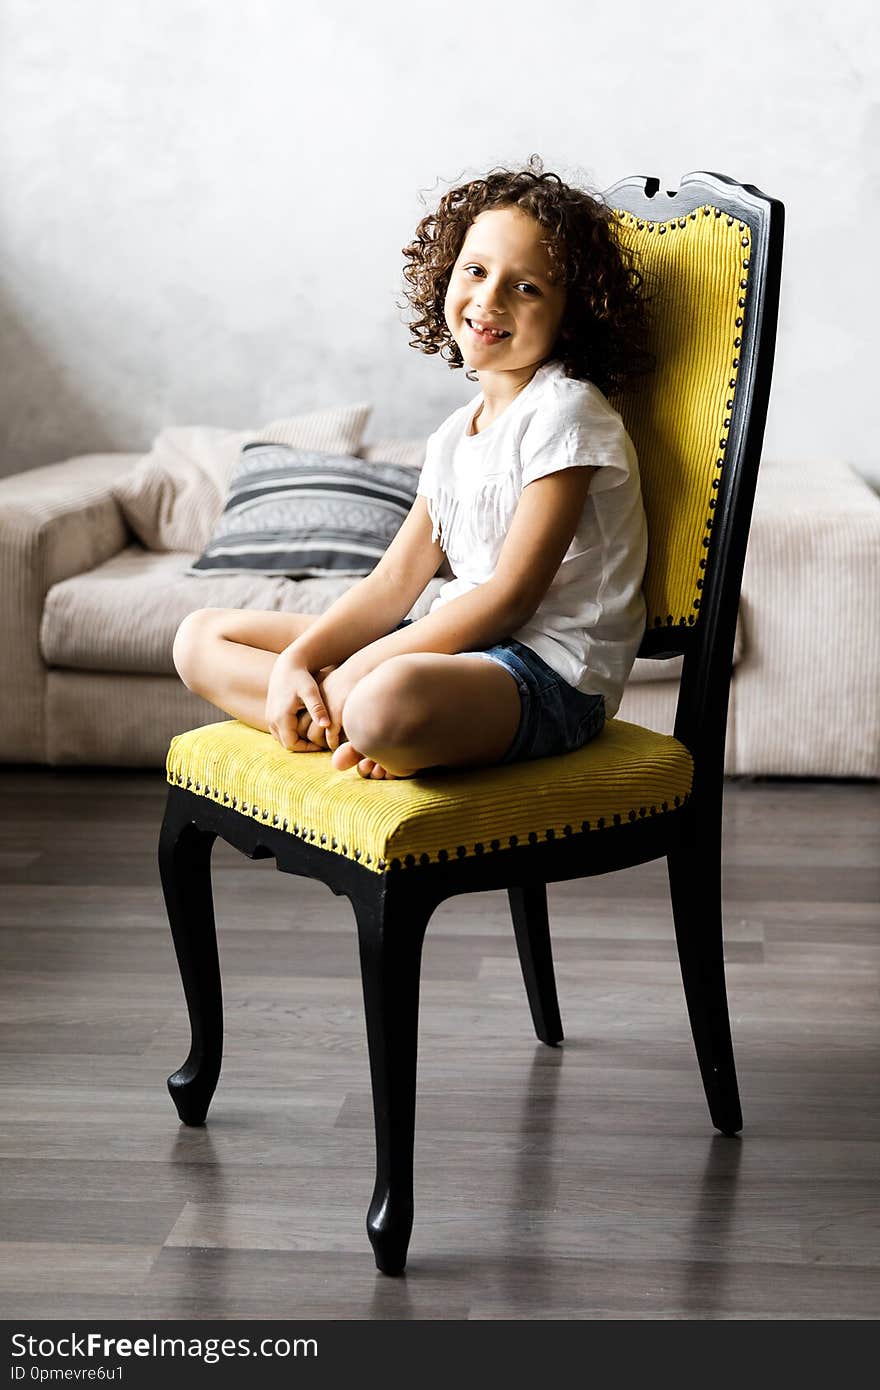 A pretty cute little girl with curly hair sitting on the chair and smiling.